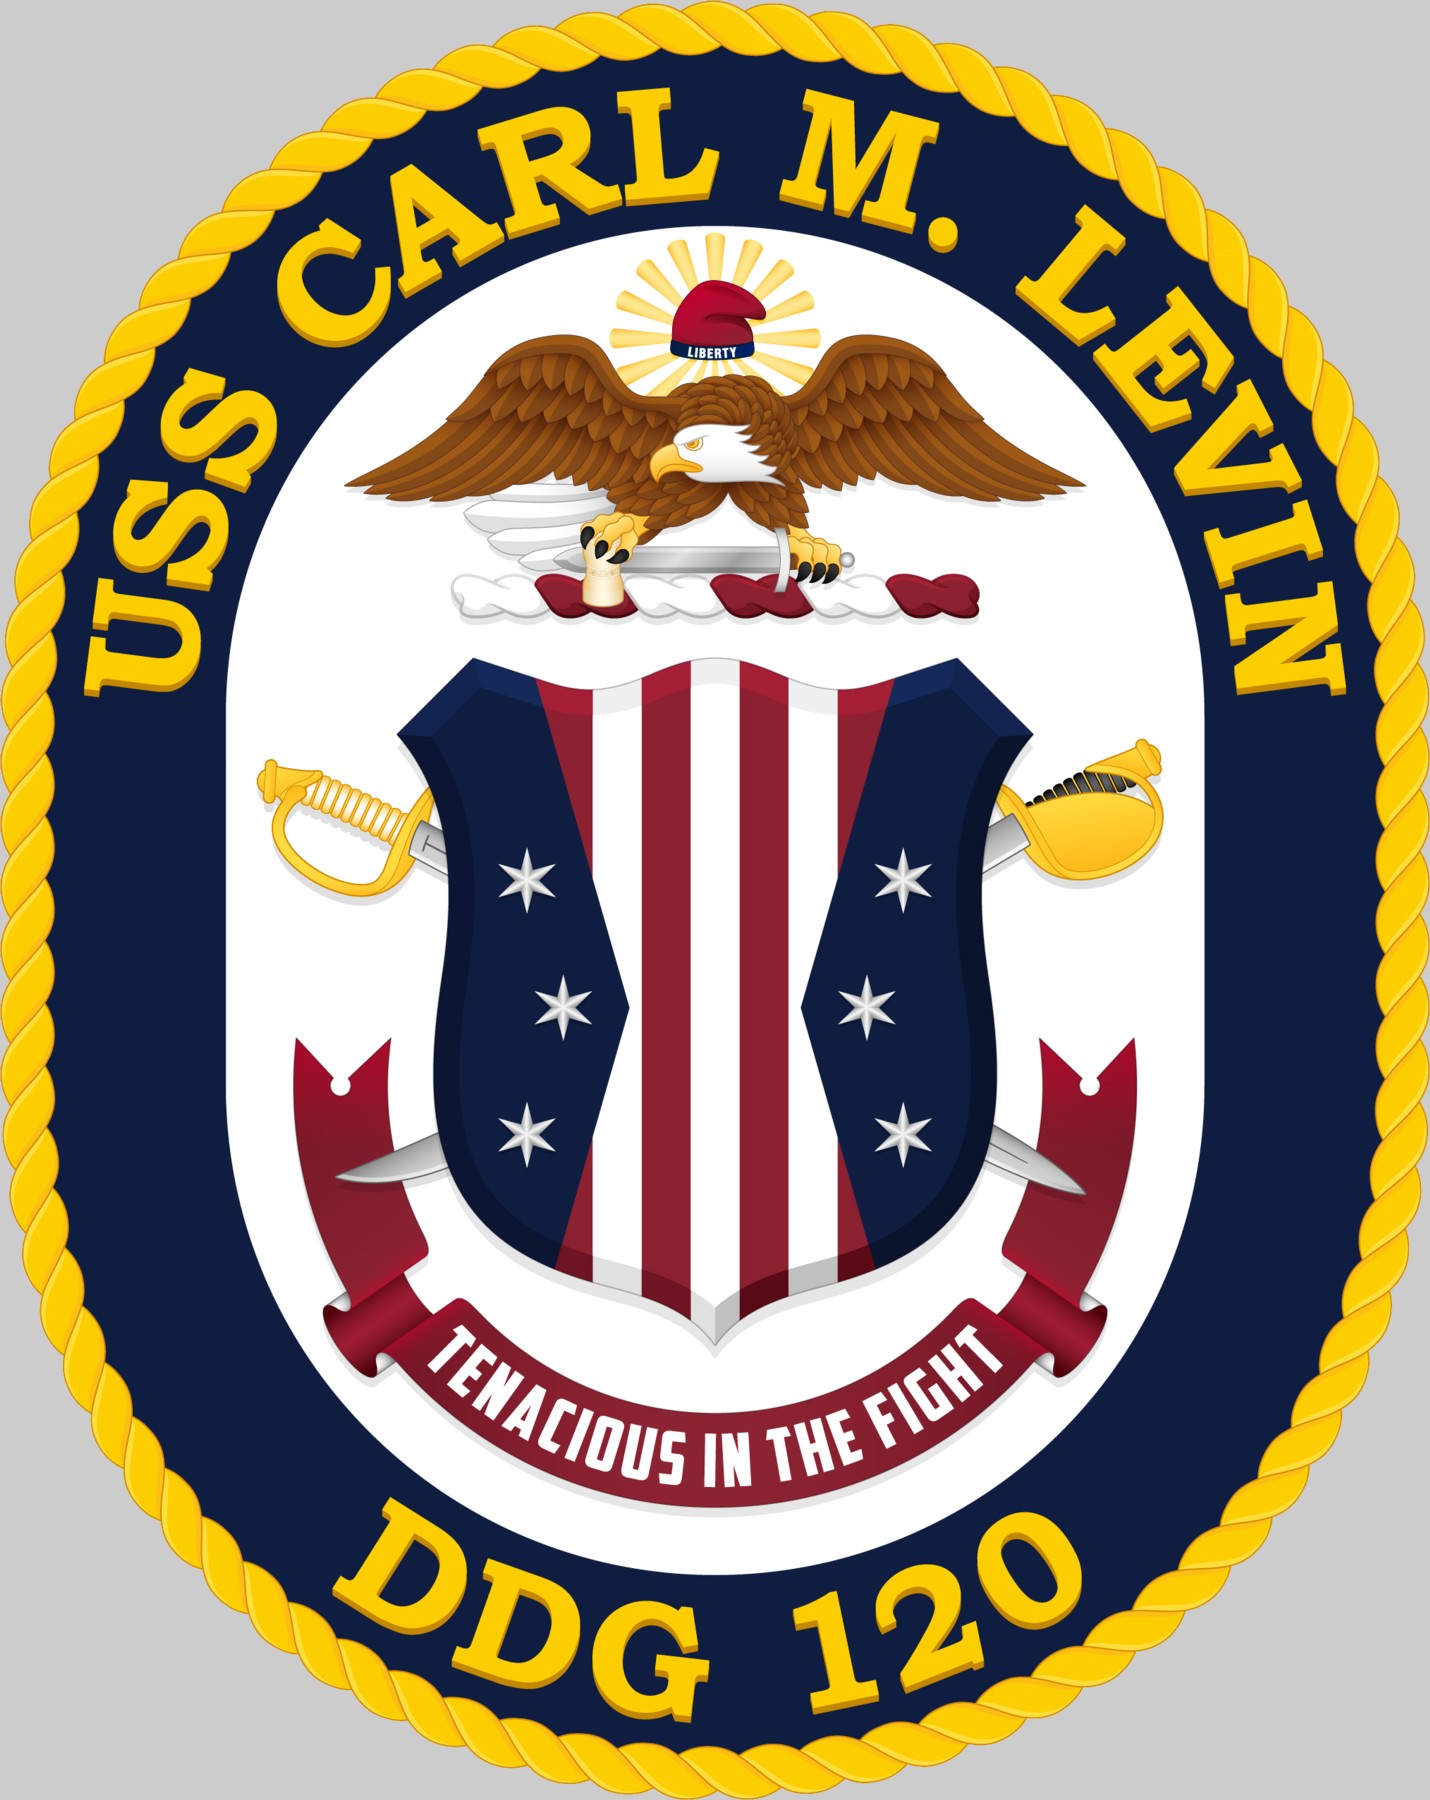 ddg-120 uss carl m. levin insignia crest patch badge arleigh burke class guided missile destroyer us navy 02x